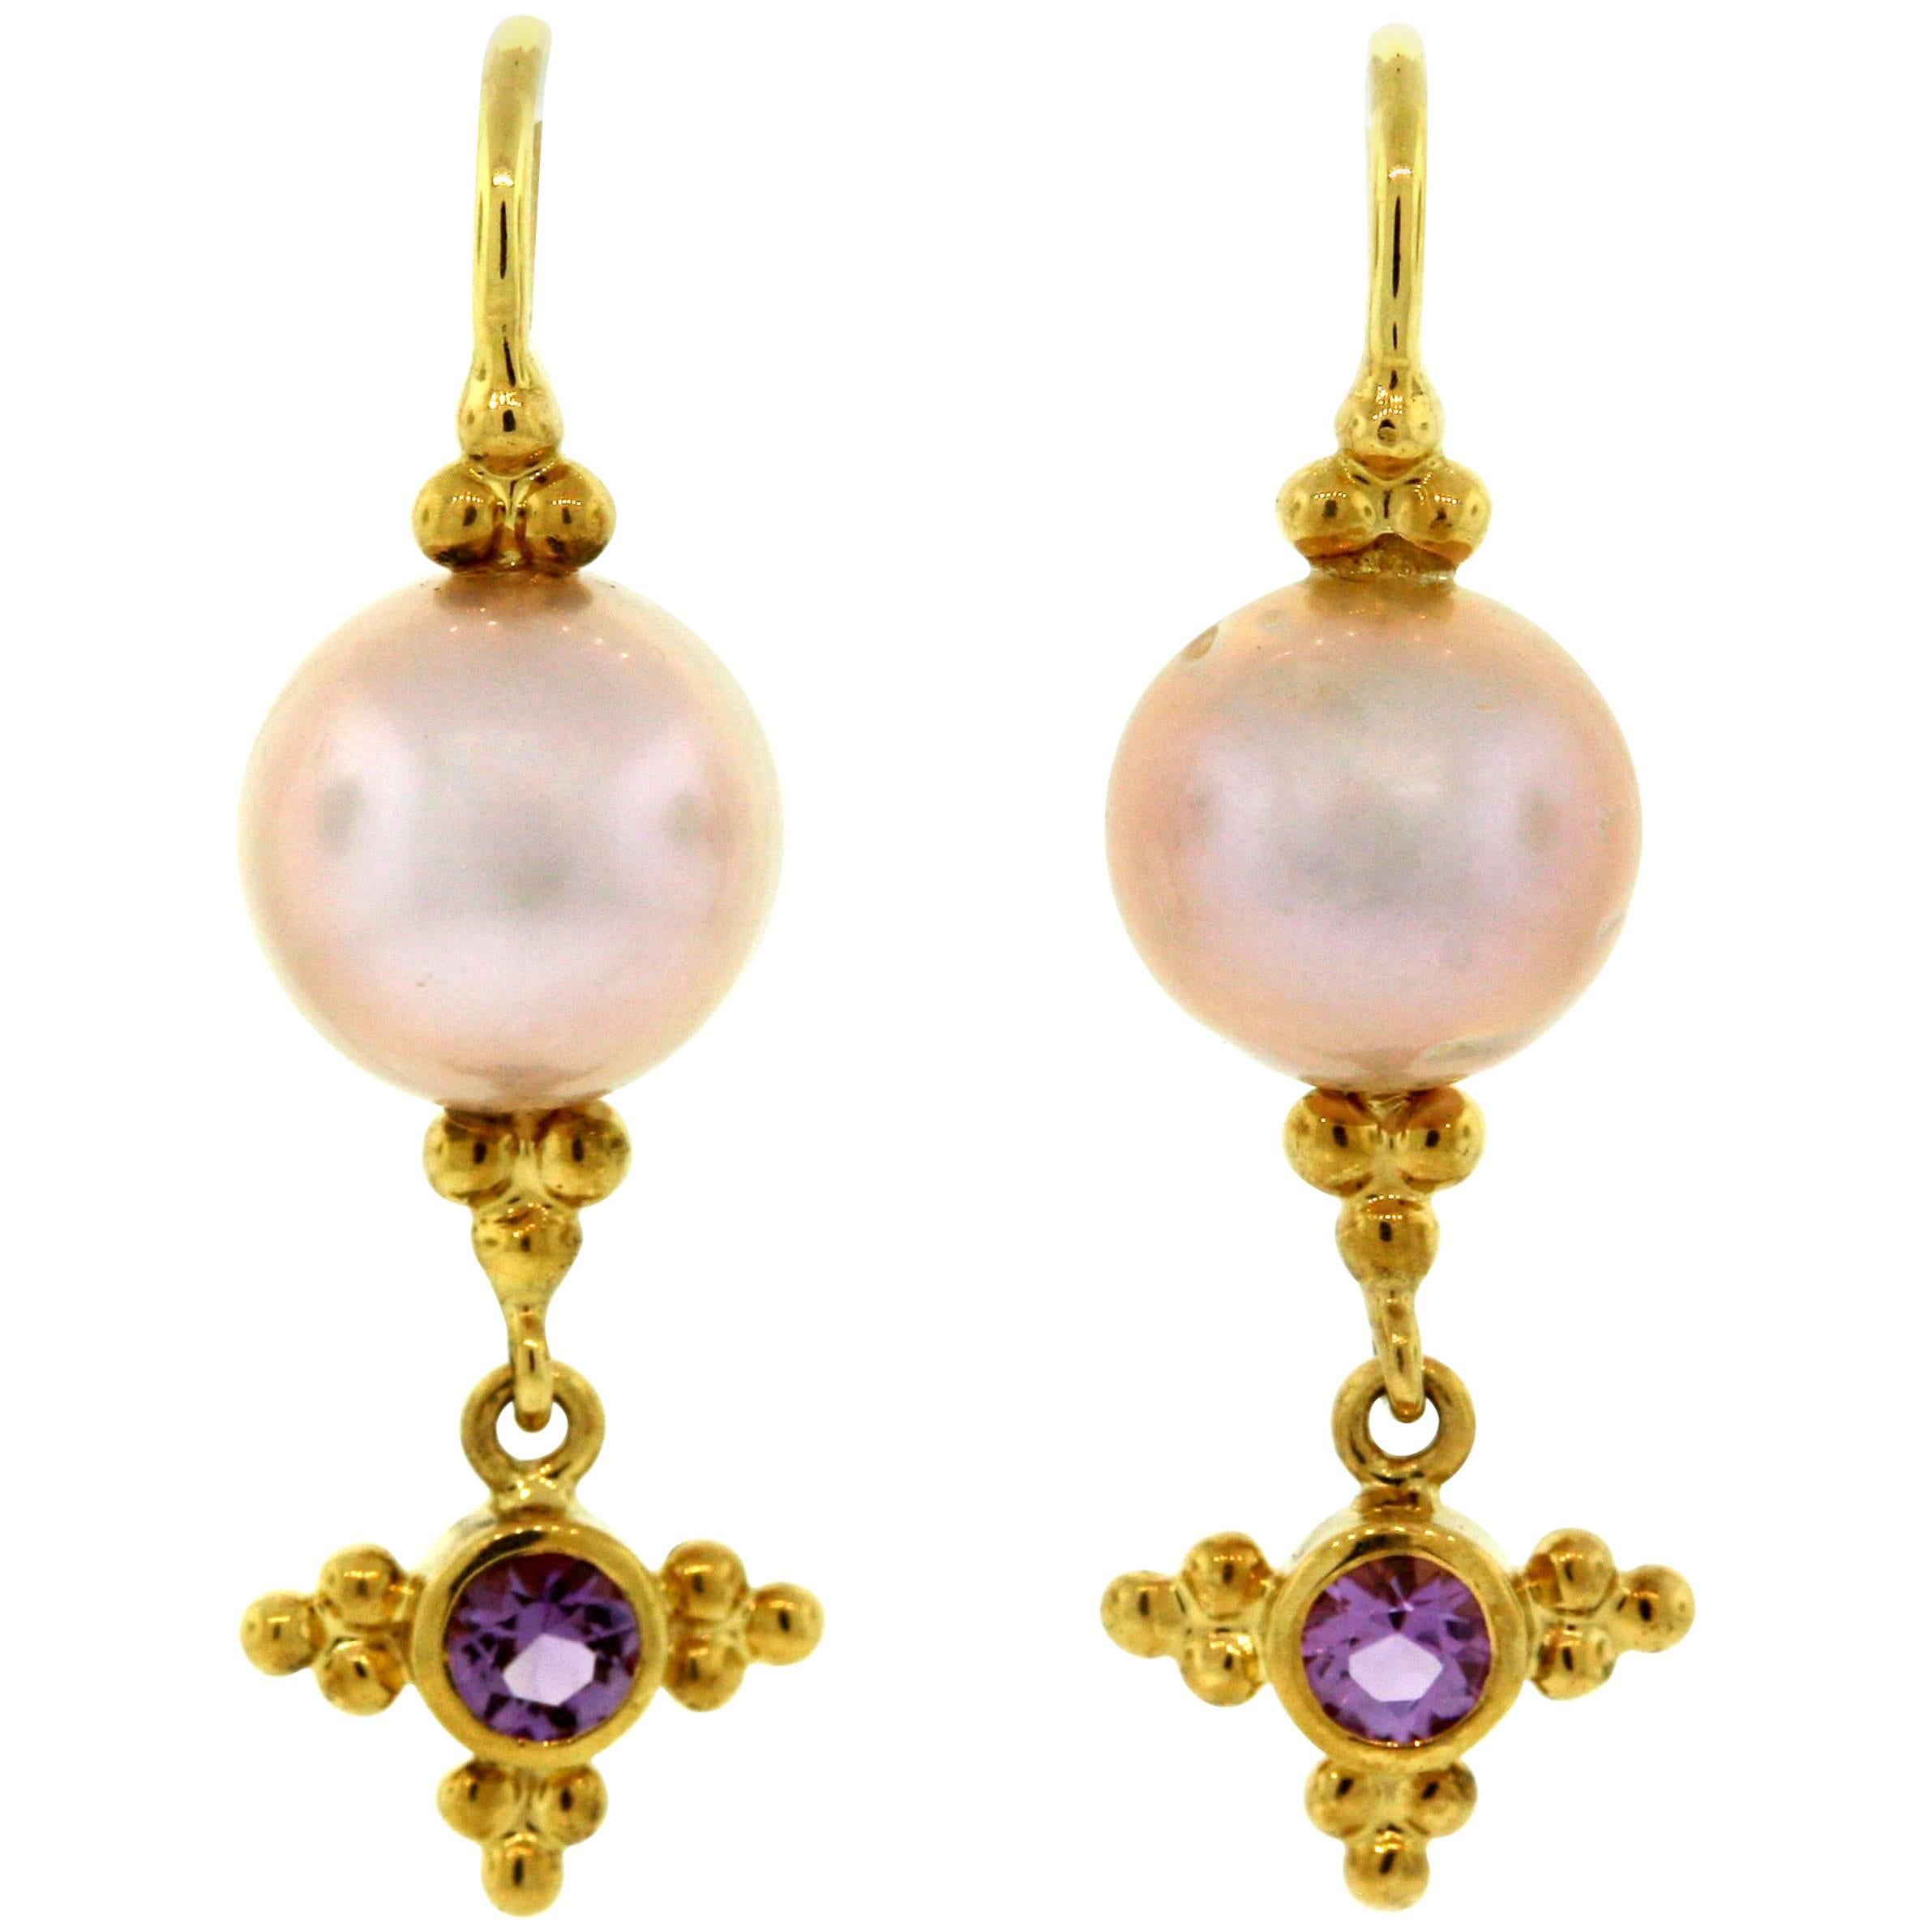 Crevoshay Handcrafted Pearl Amethyst Gold Earrings